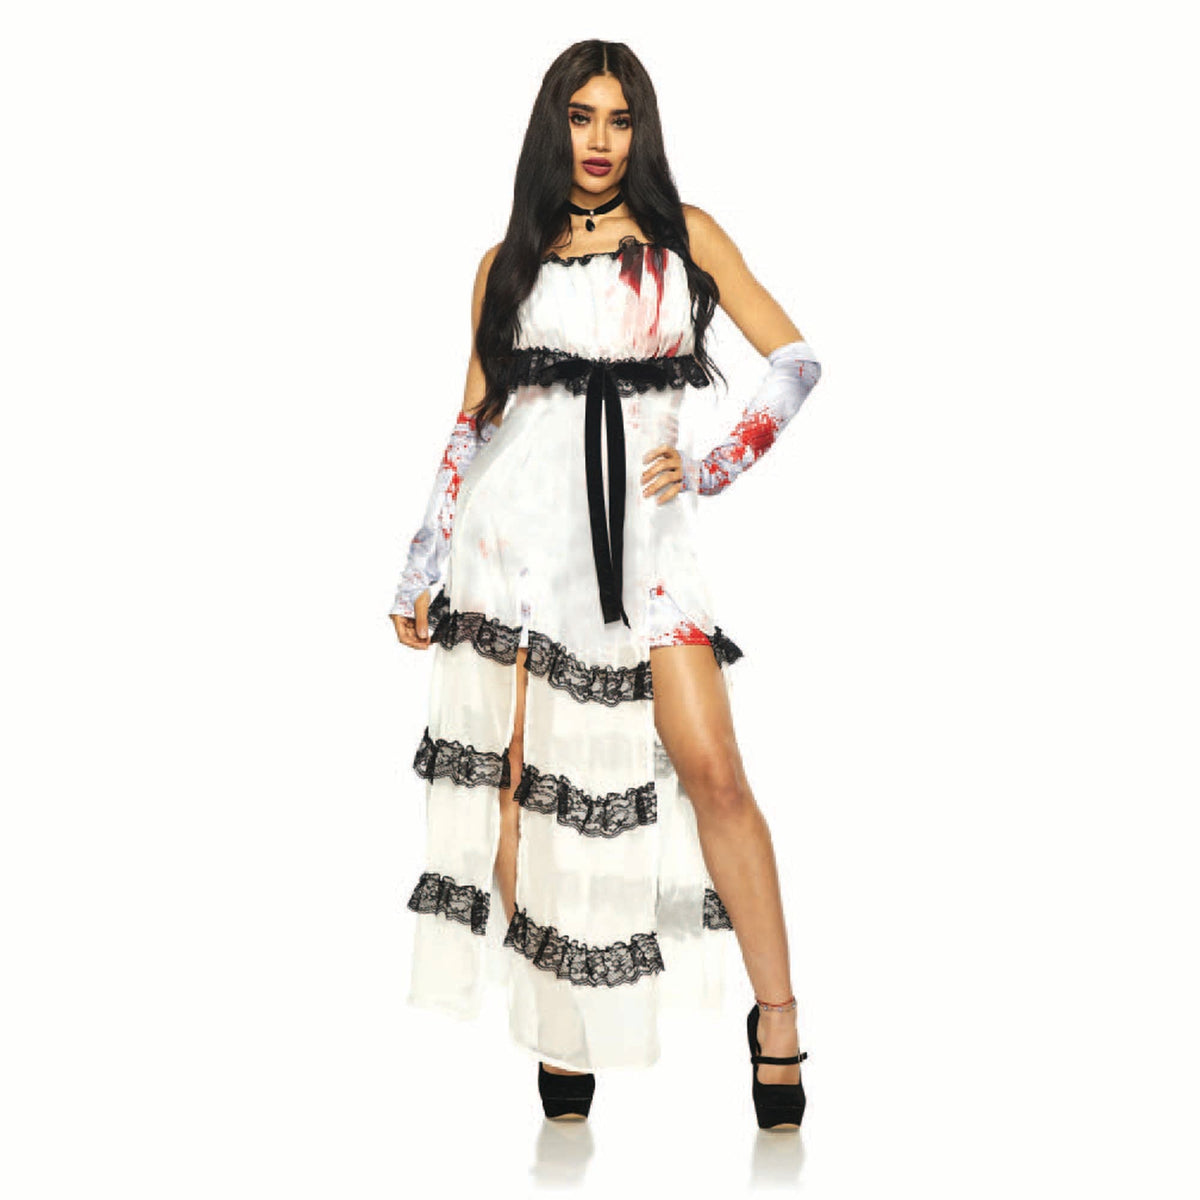 Seeing Red Inc. Costumes Undead Prom Costume for Adults, White Dress Stained with Blood